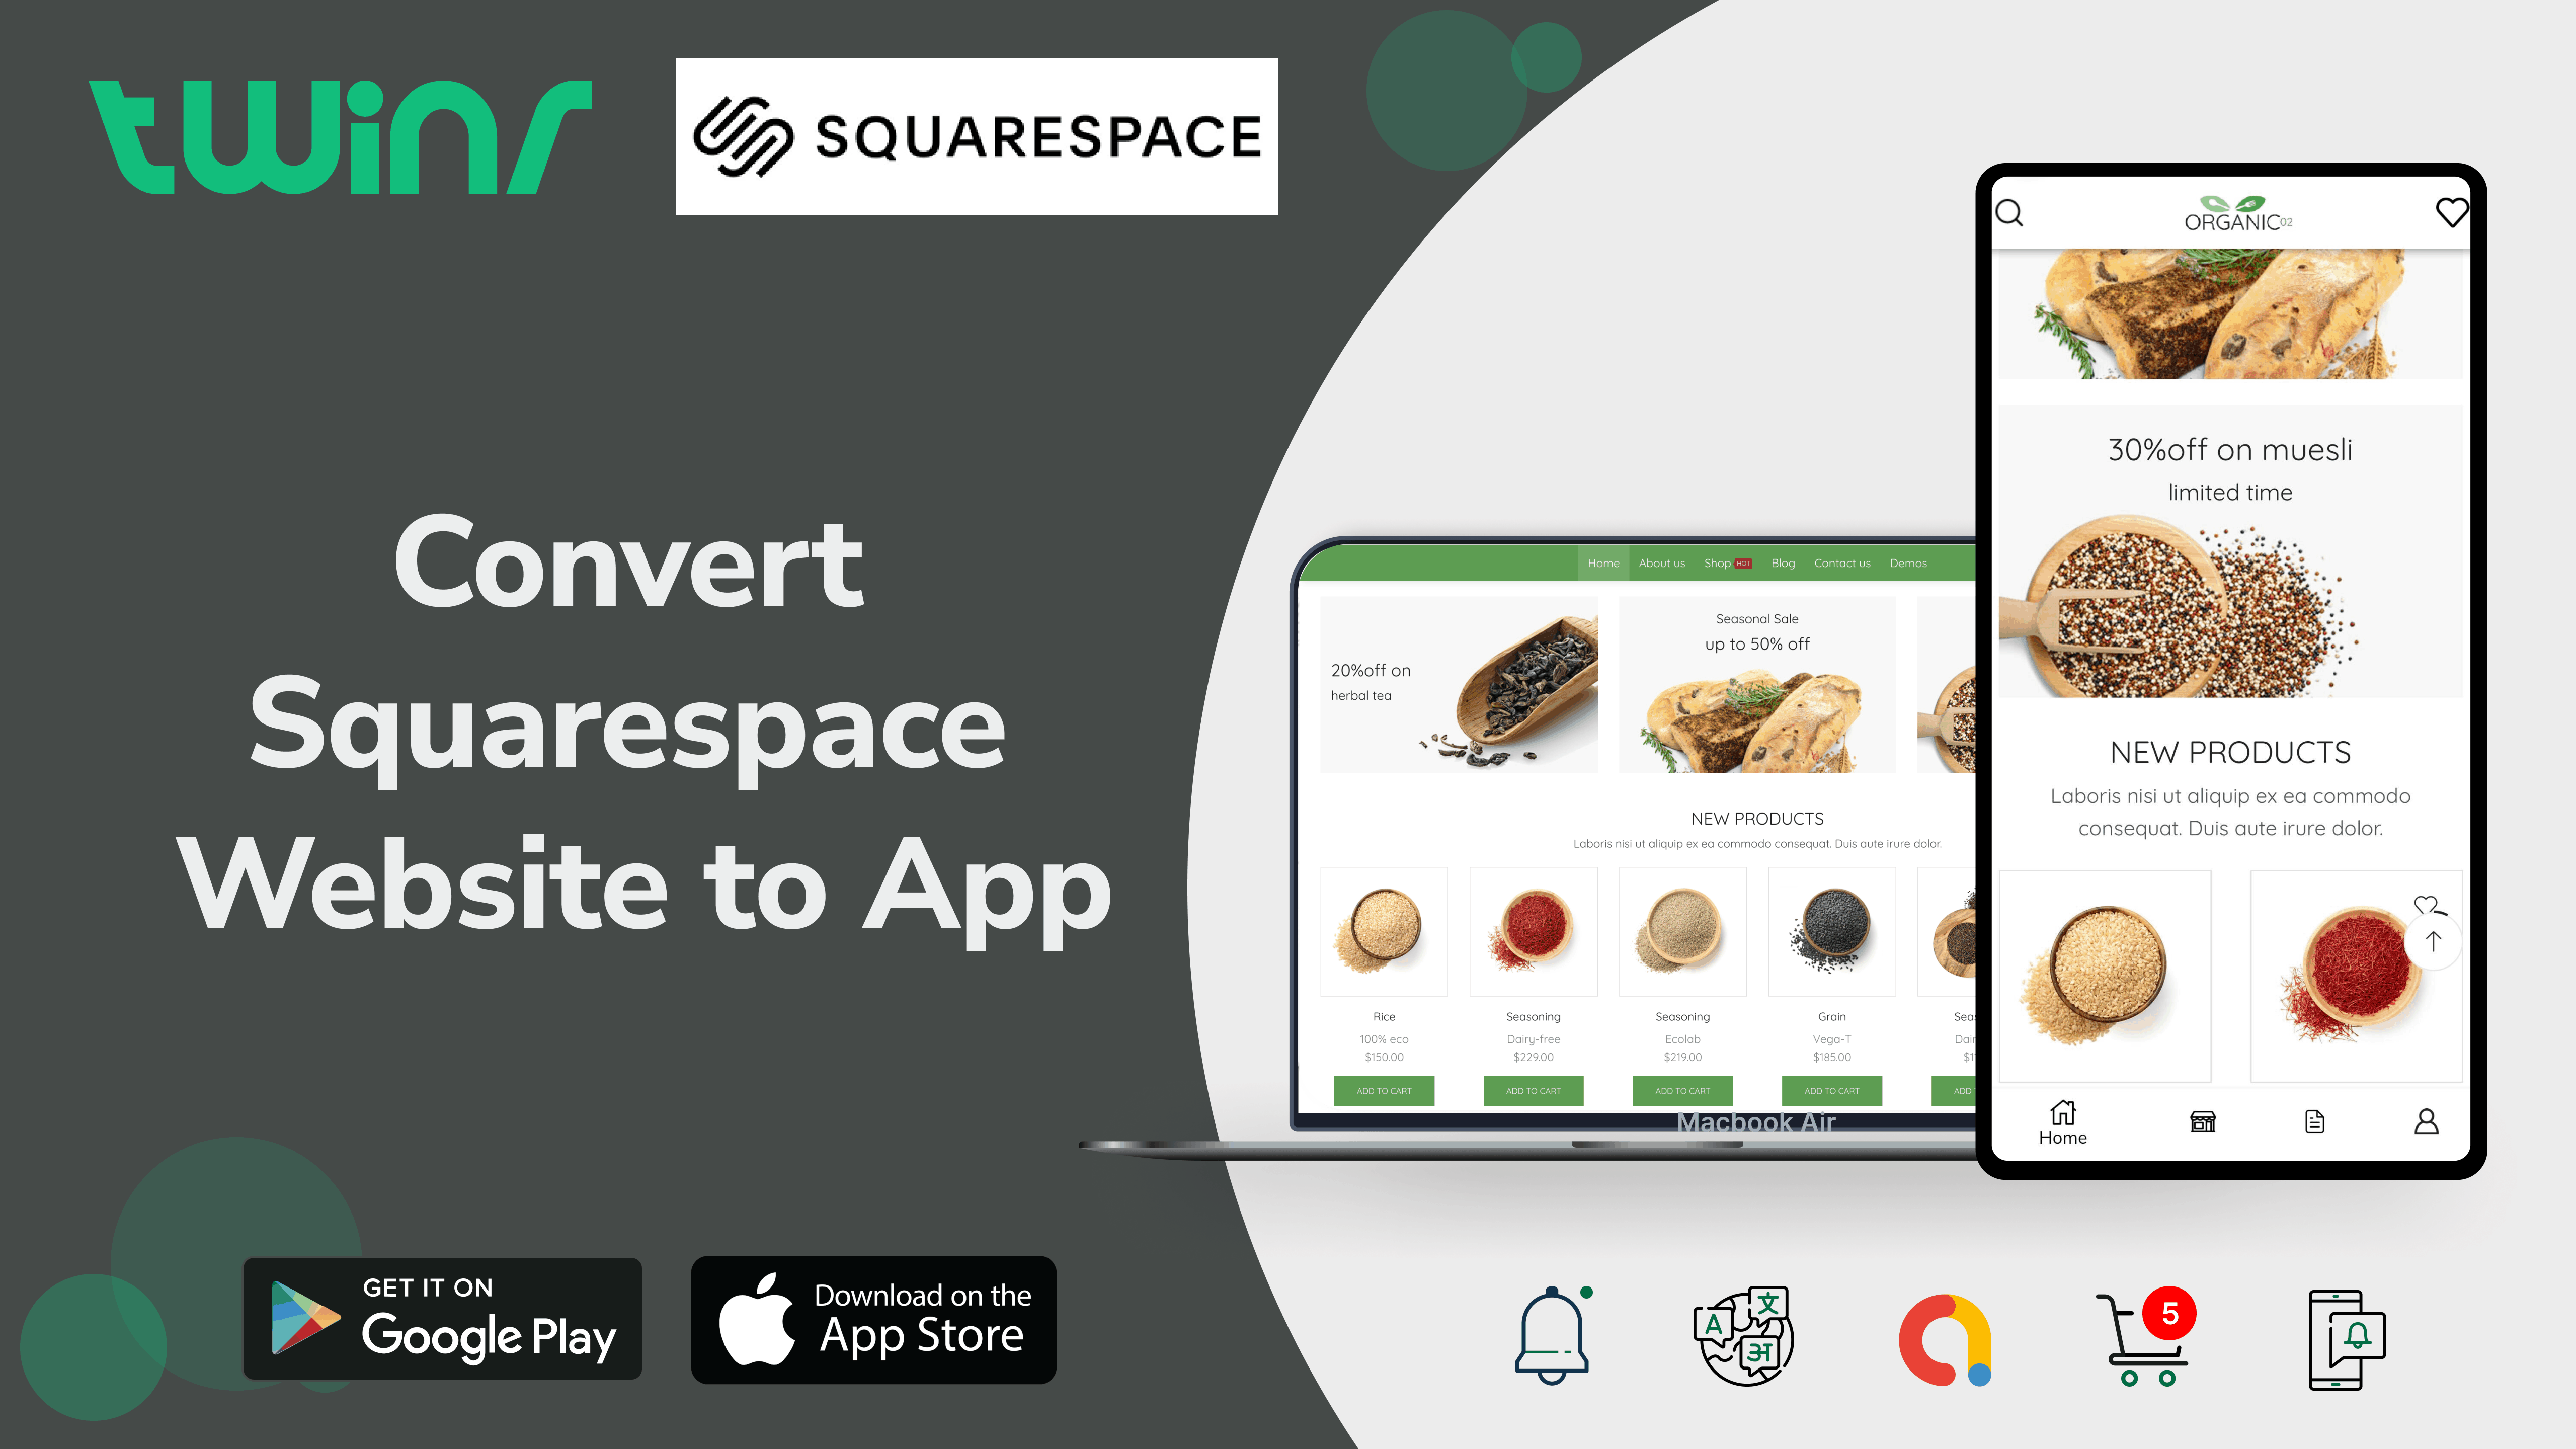 Convert Squarespace Website to App is Easy